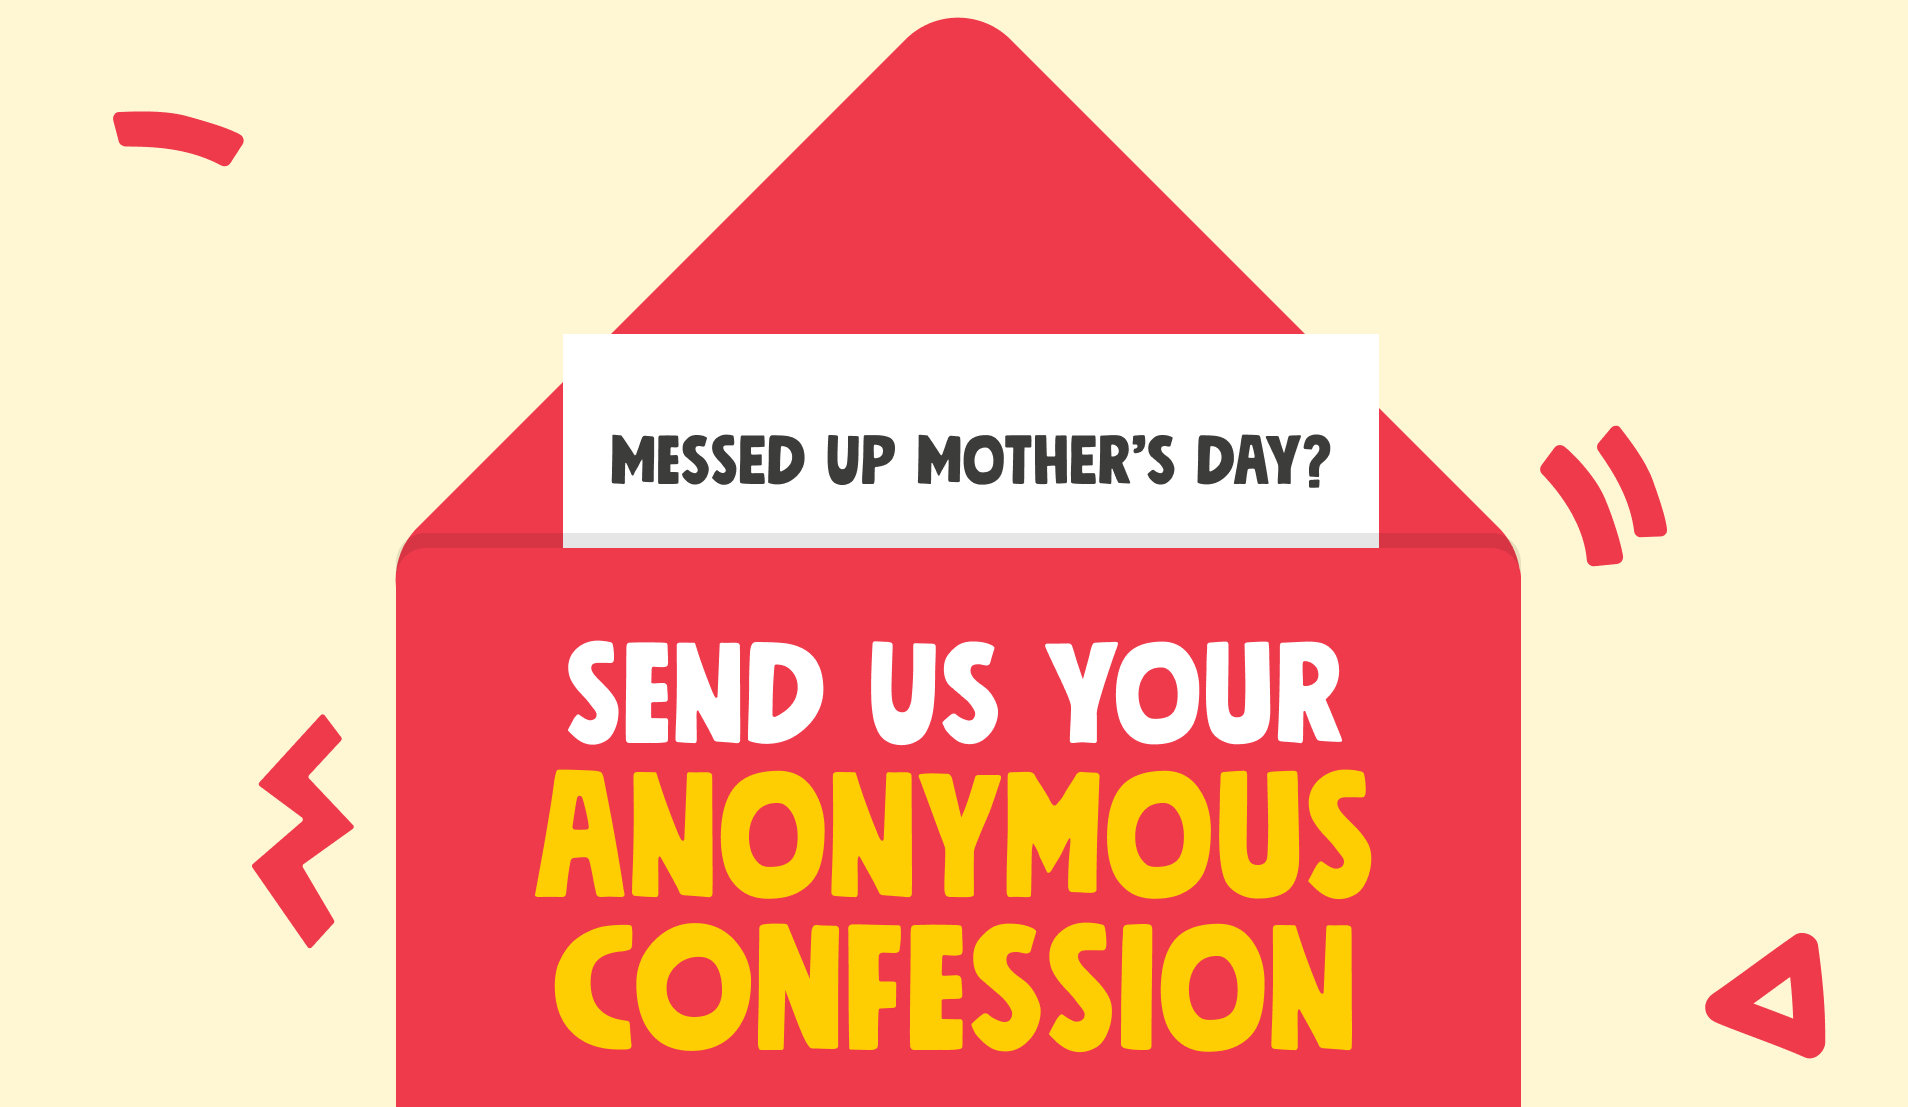 Messed up Mother's Day? Send us your anonymous confession